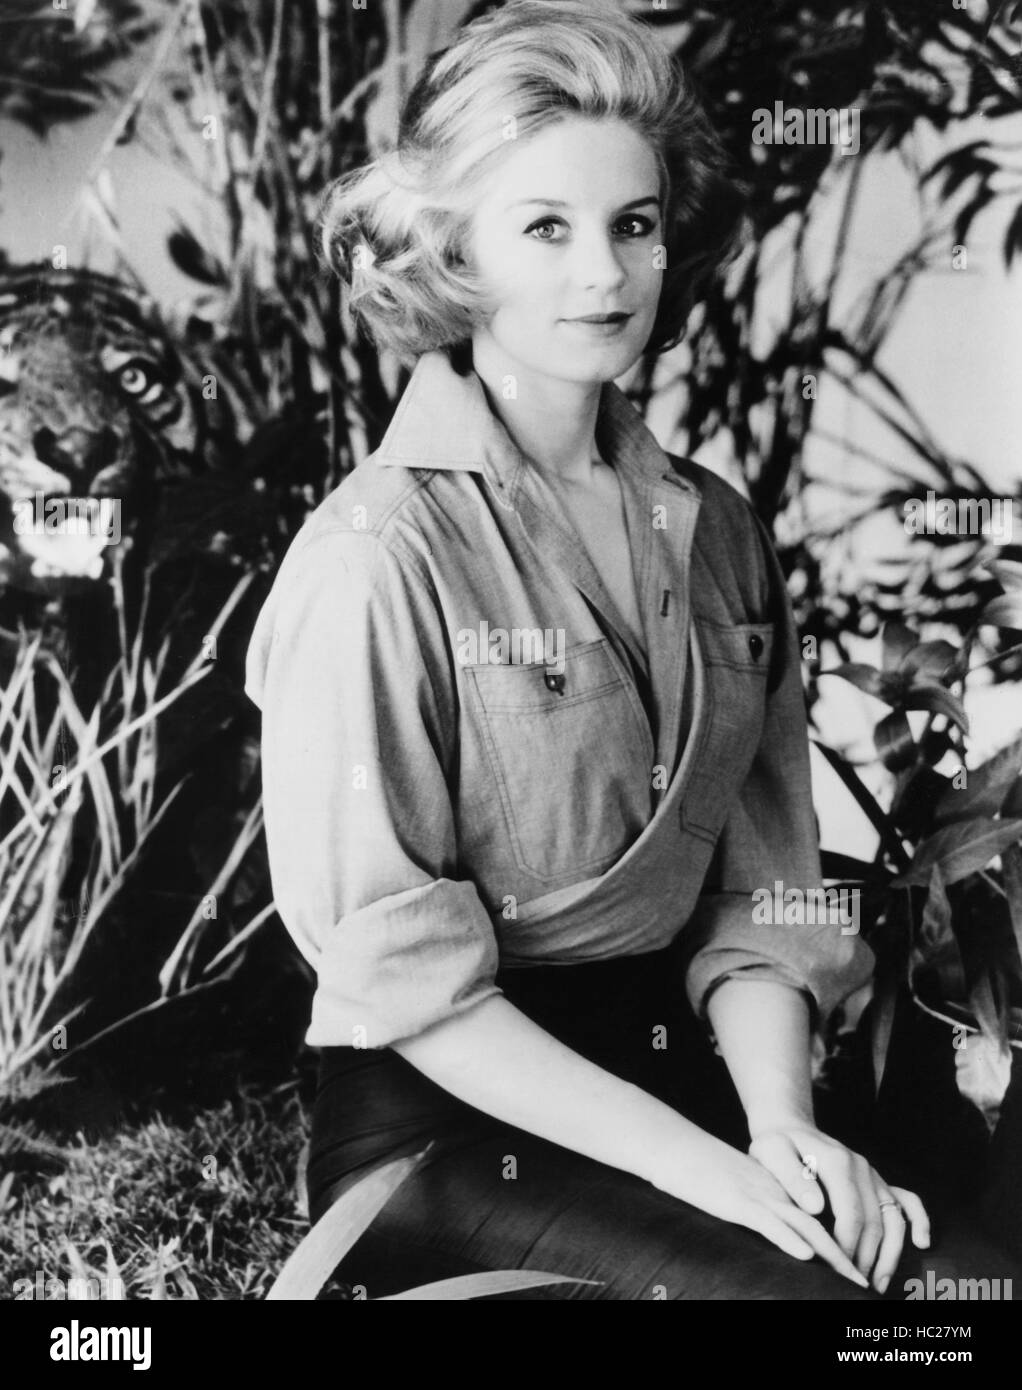 THE MIND BENDERS, Mary Ure, 1963 Stock Photo - Alamy